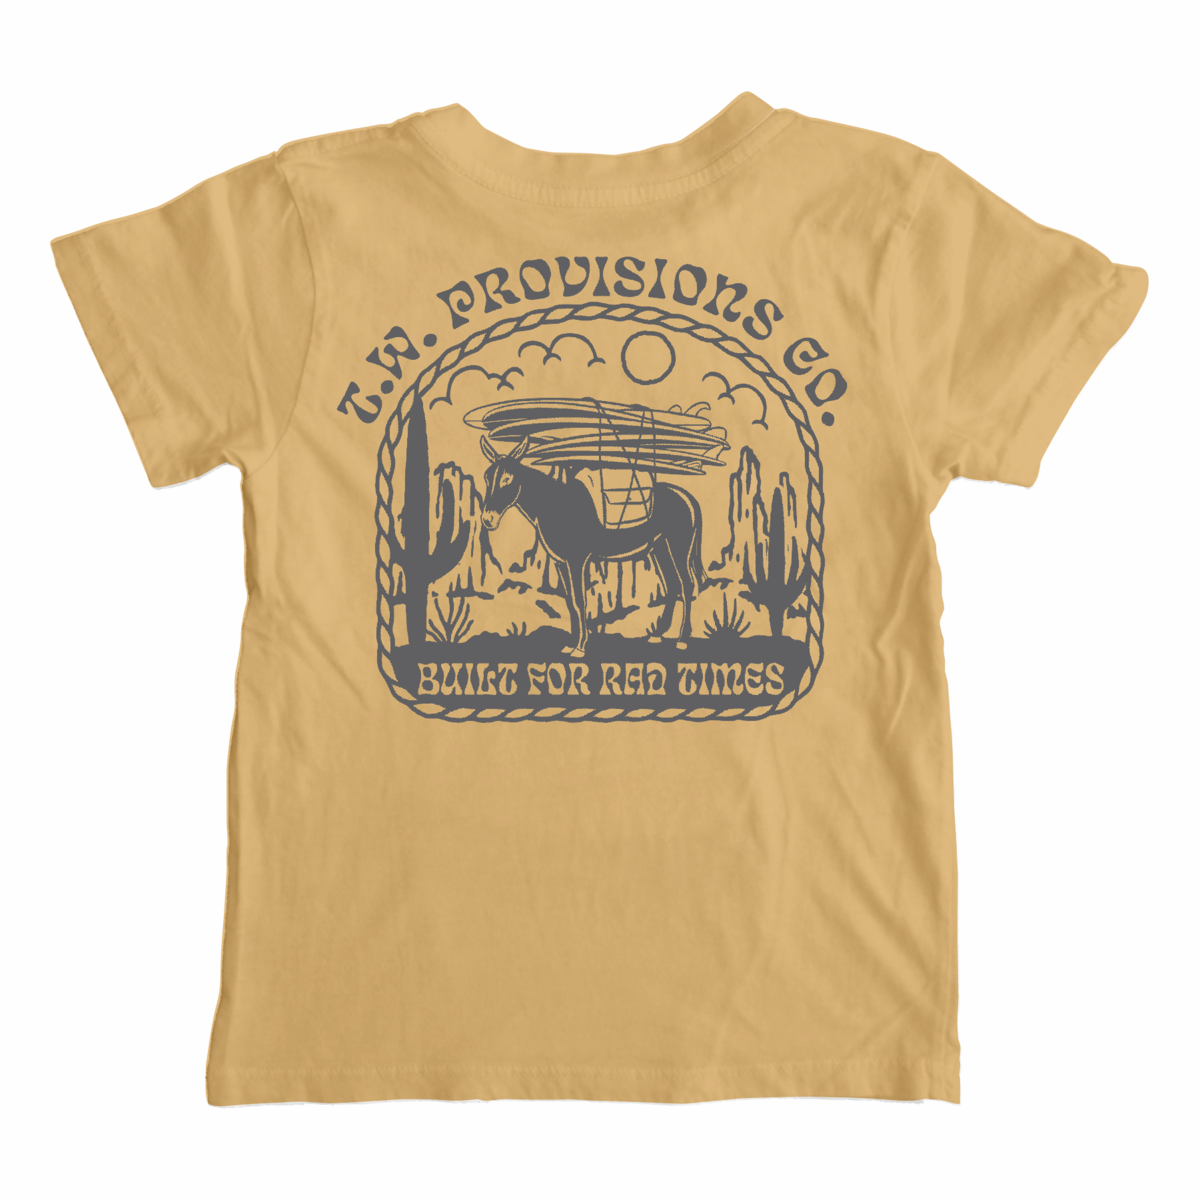 provisions tee shirt | vintage gold